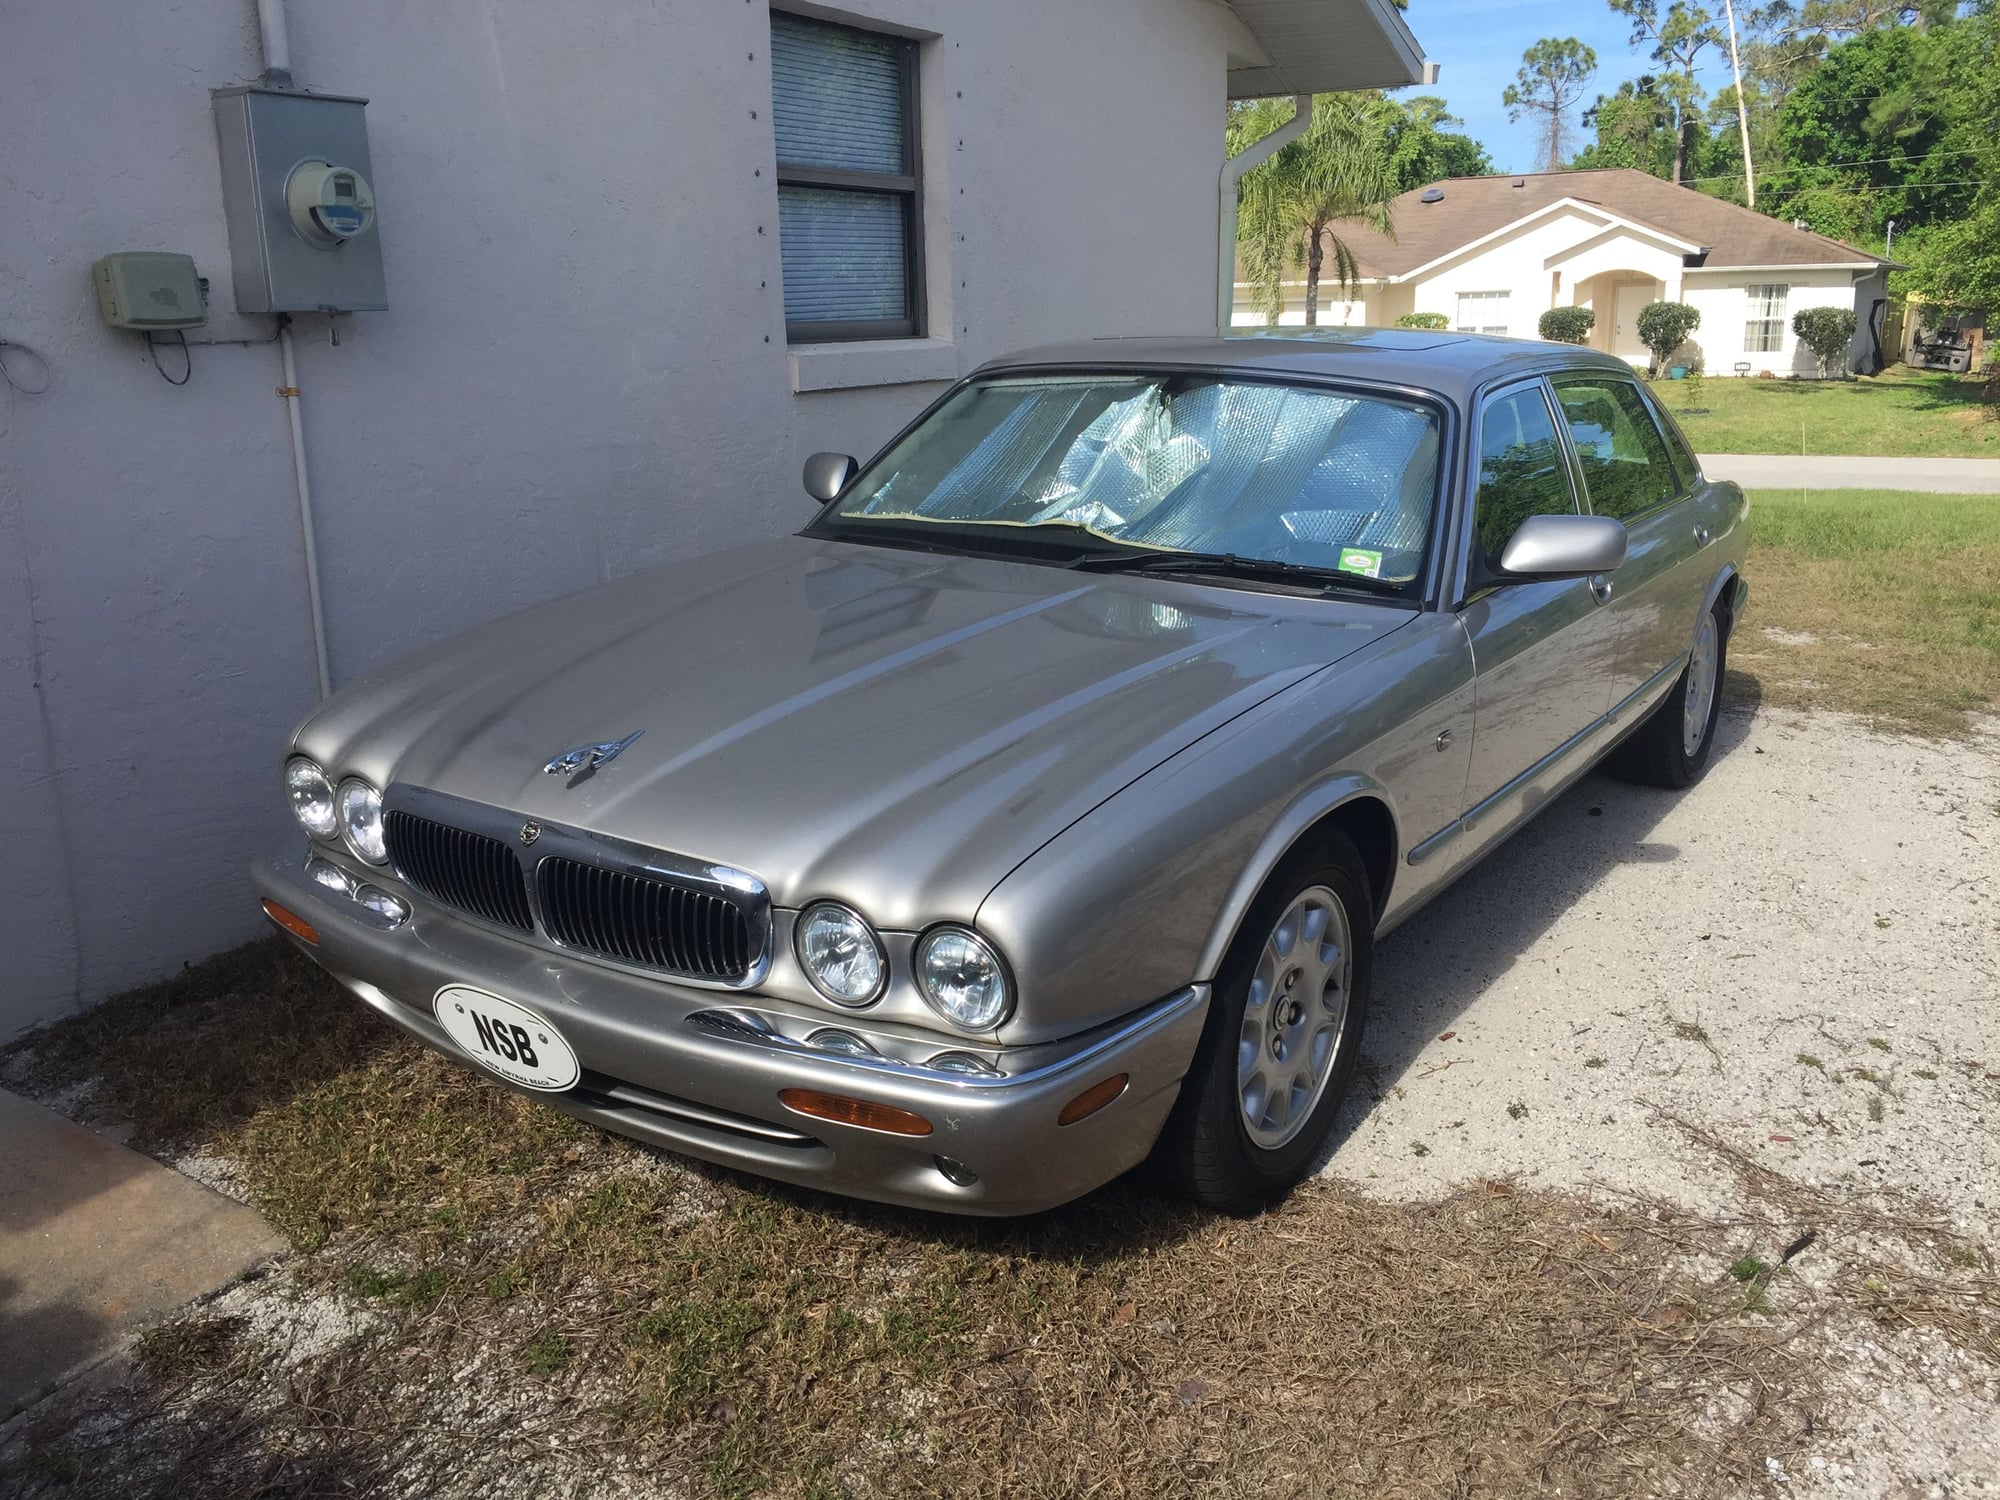 1998 Jaguar XJ8 - Great looking car hate to sell - Used - VIN Sajhx6248wc842353 - 92,000 Miles - 8 cyl - 2WD - Automatic - Sedan - Silver - Edgewater, FL 32141, United States